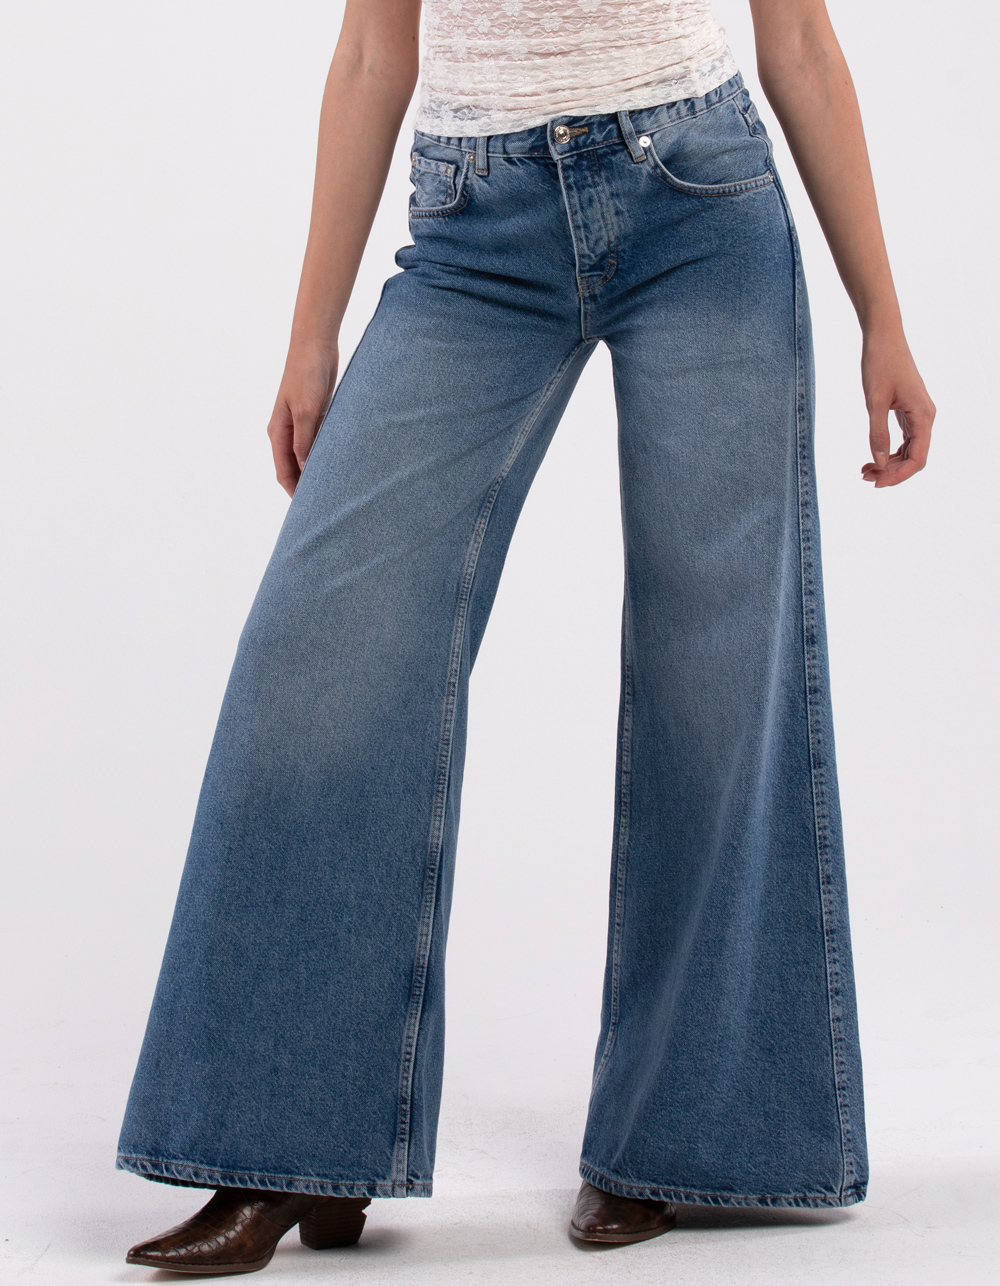 FREE PEOPLE Lovefool Low Rise Womens Jeans - MEDIUM WASH | Tillys